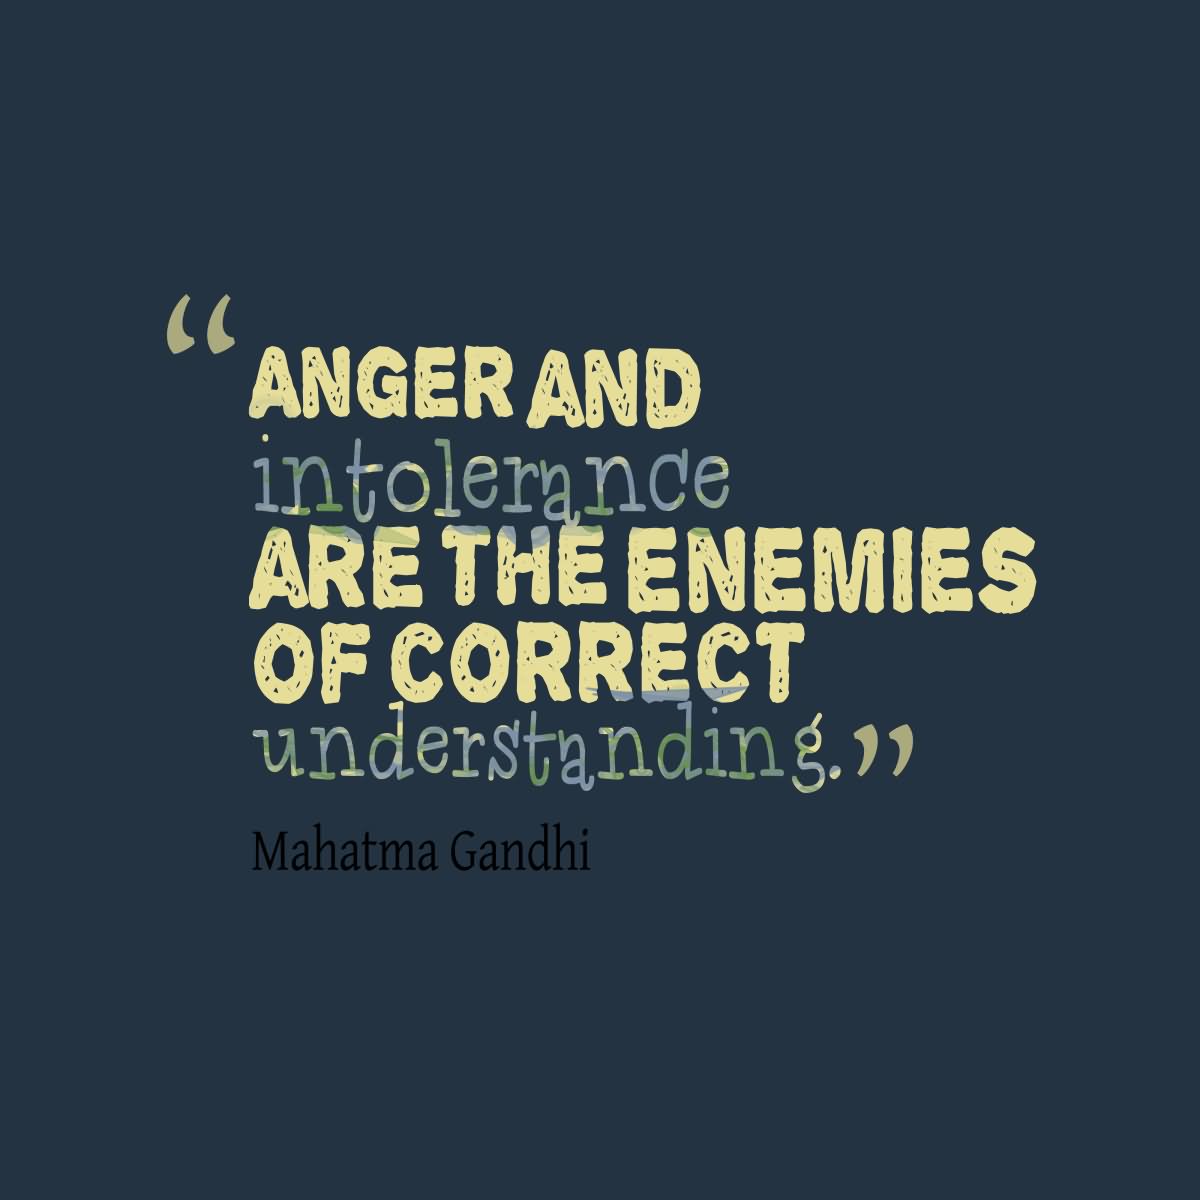 Anger And Intolerance Are The Enemies Of Correct Understanding.